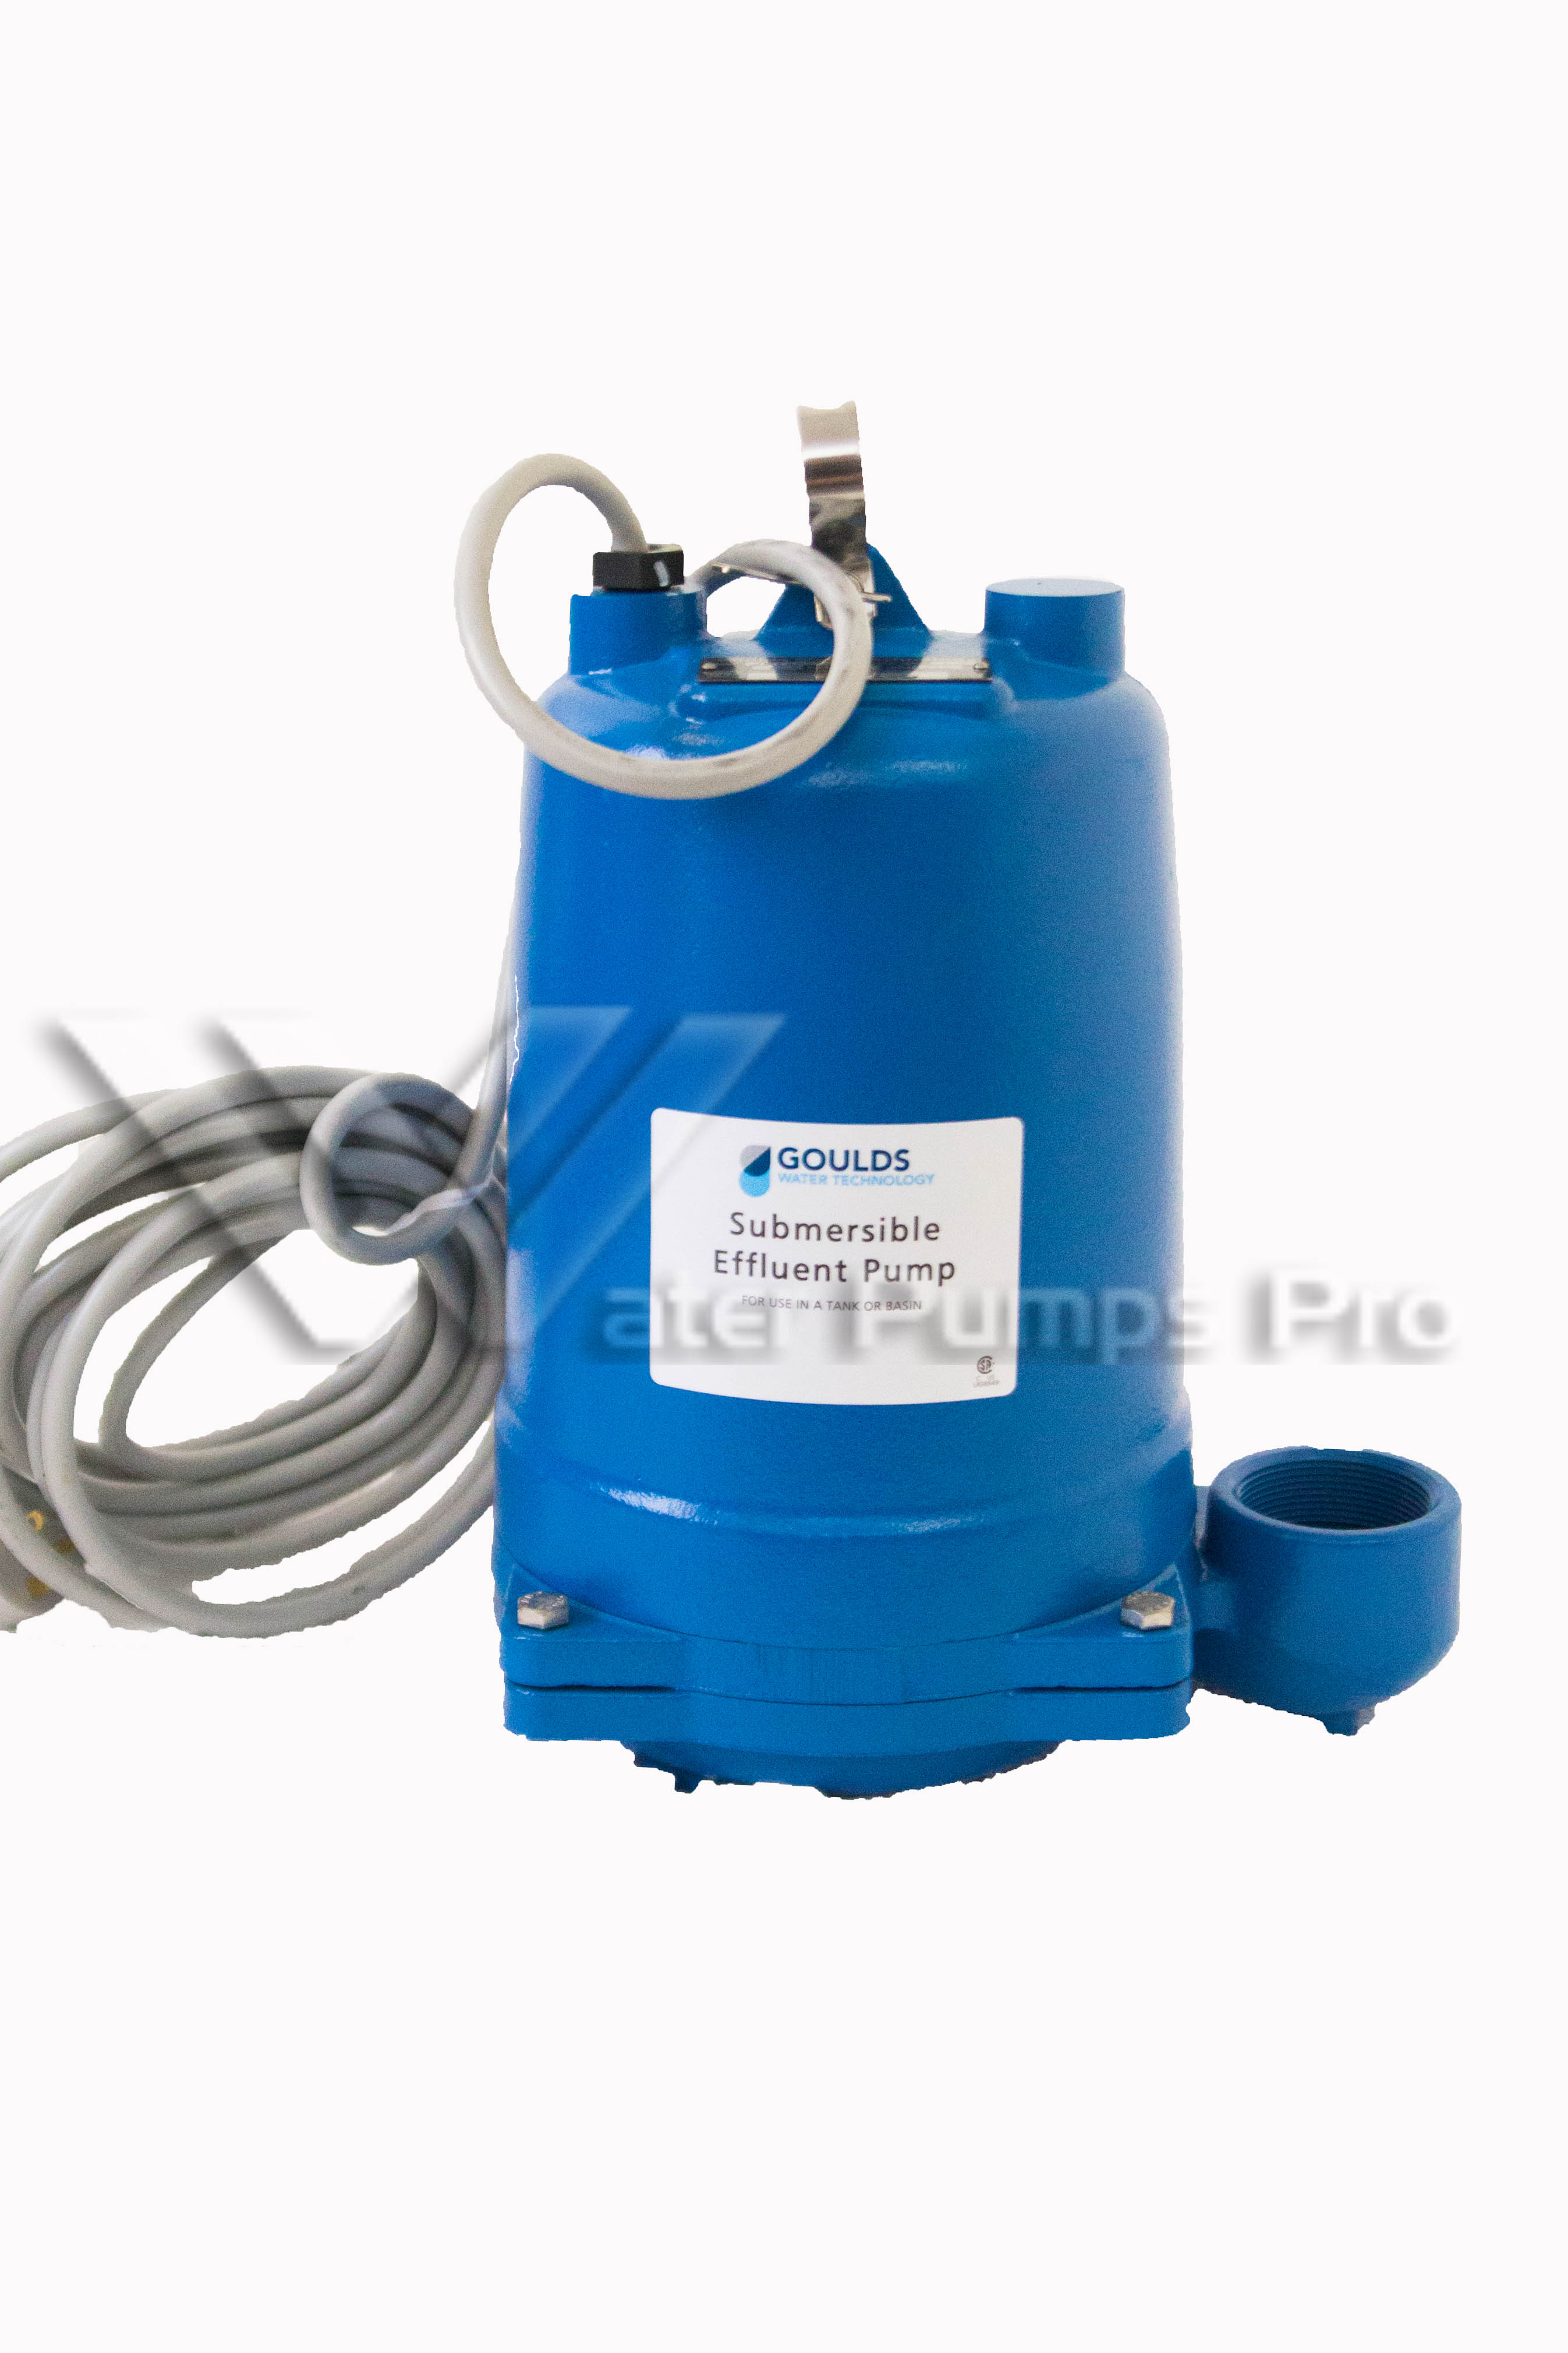 Goulds WE0712H 3/4 HP 230V Submersible Effluent Pump - Click Image to Close